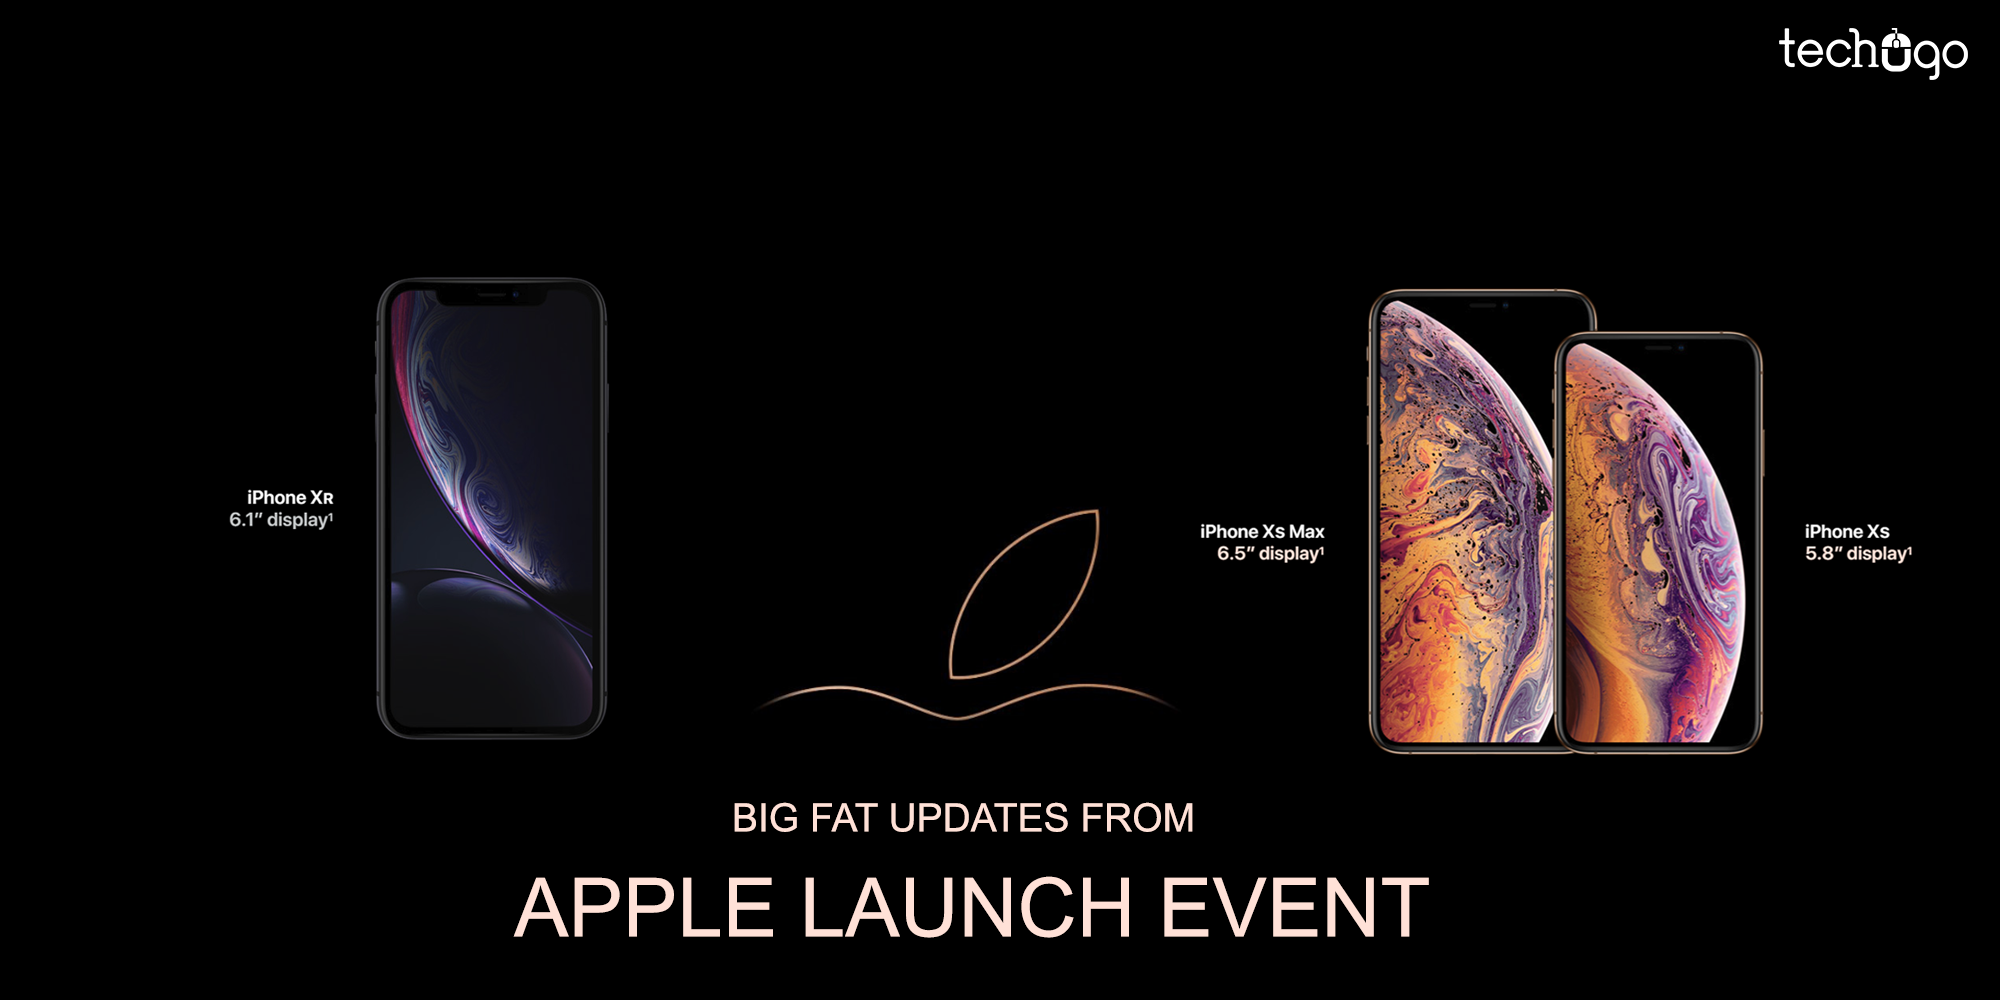 Big Fat Updates From Apple Launch Event